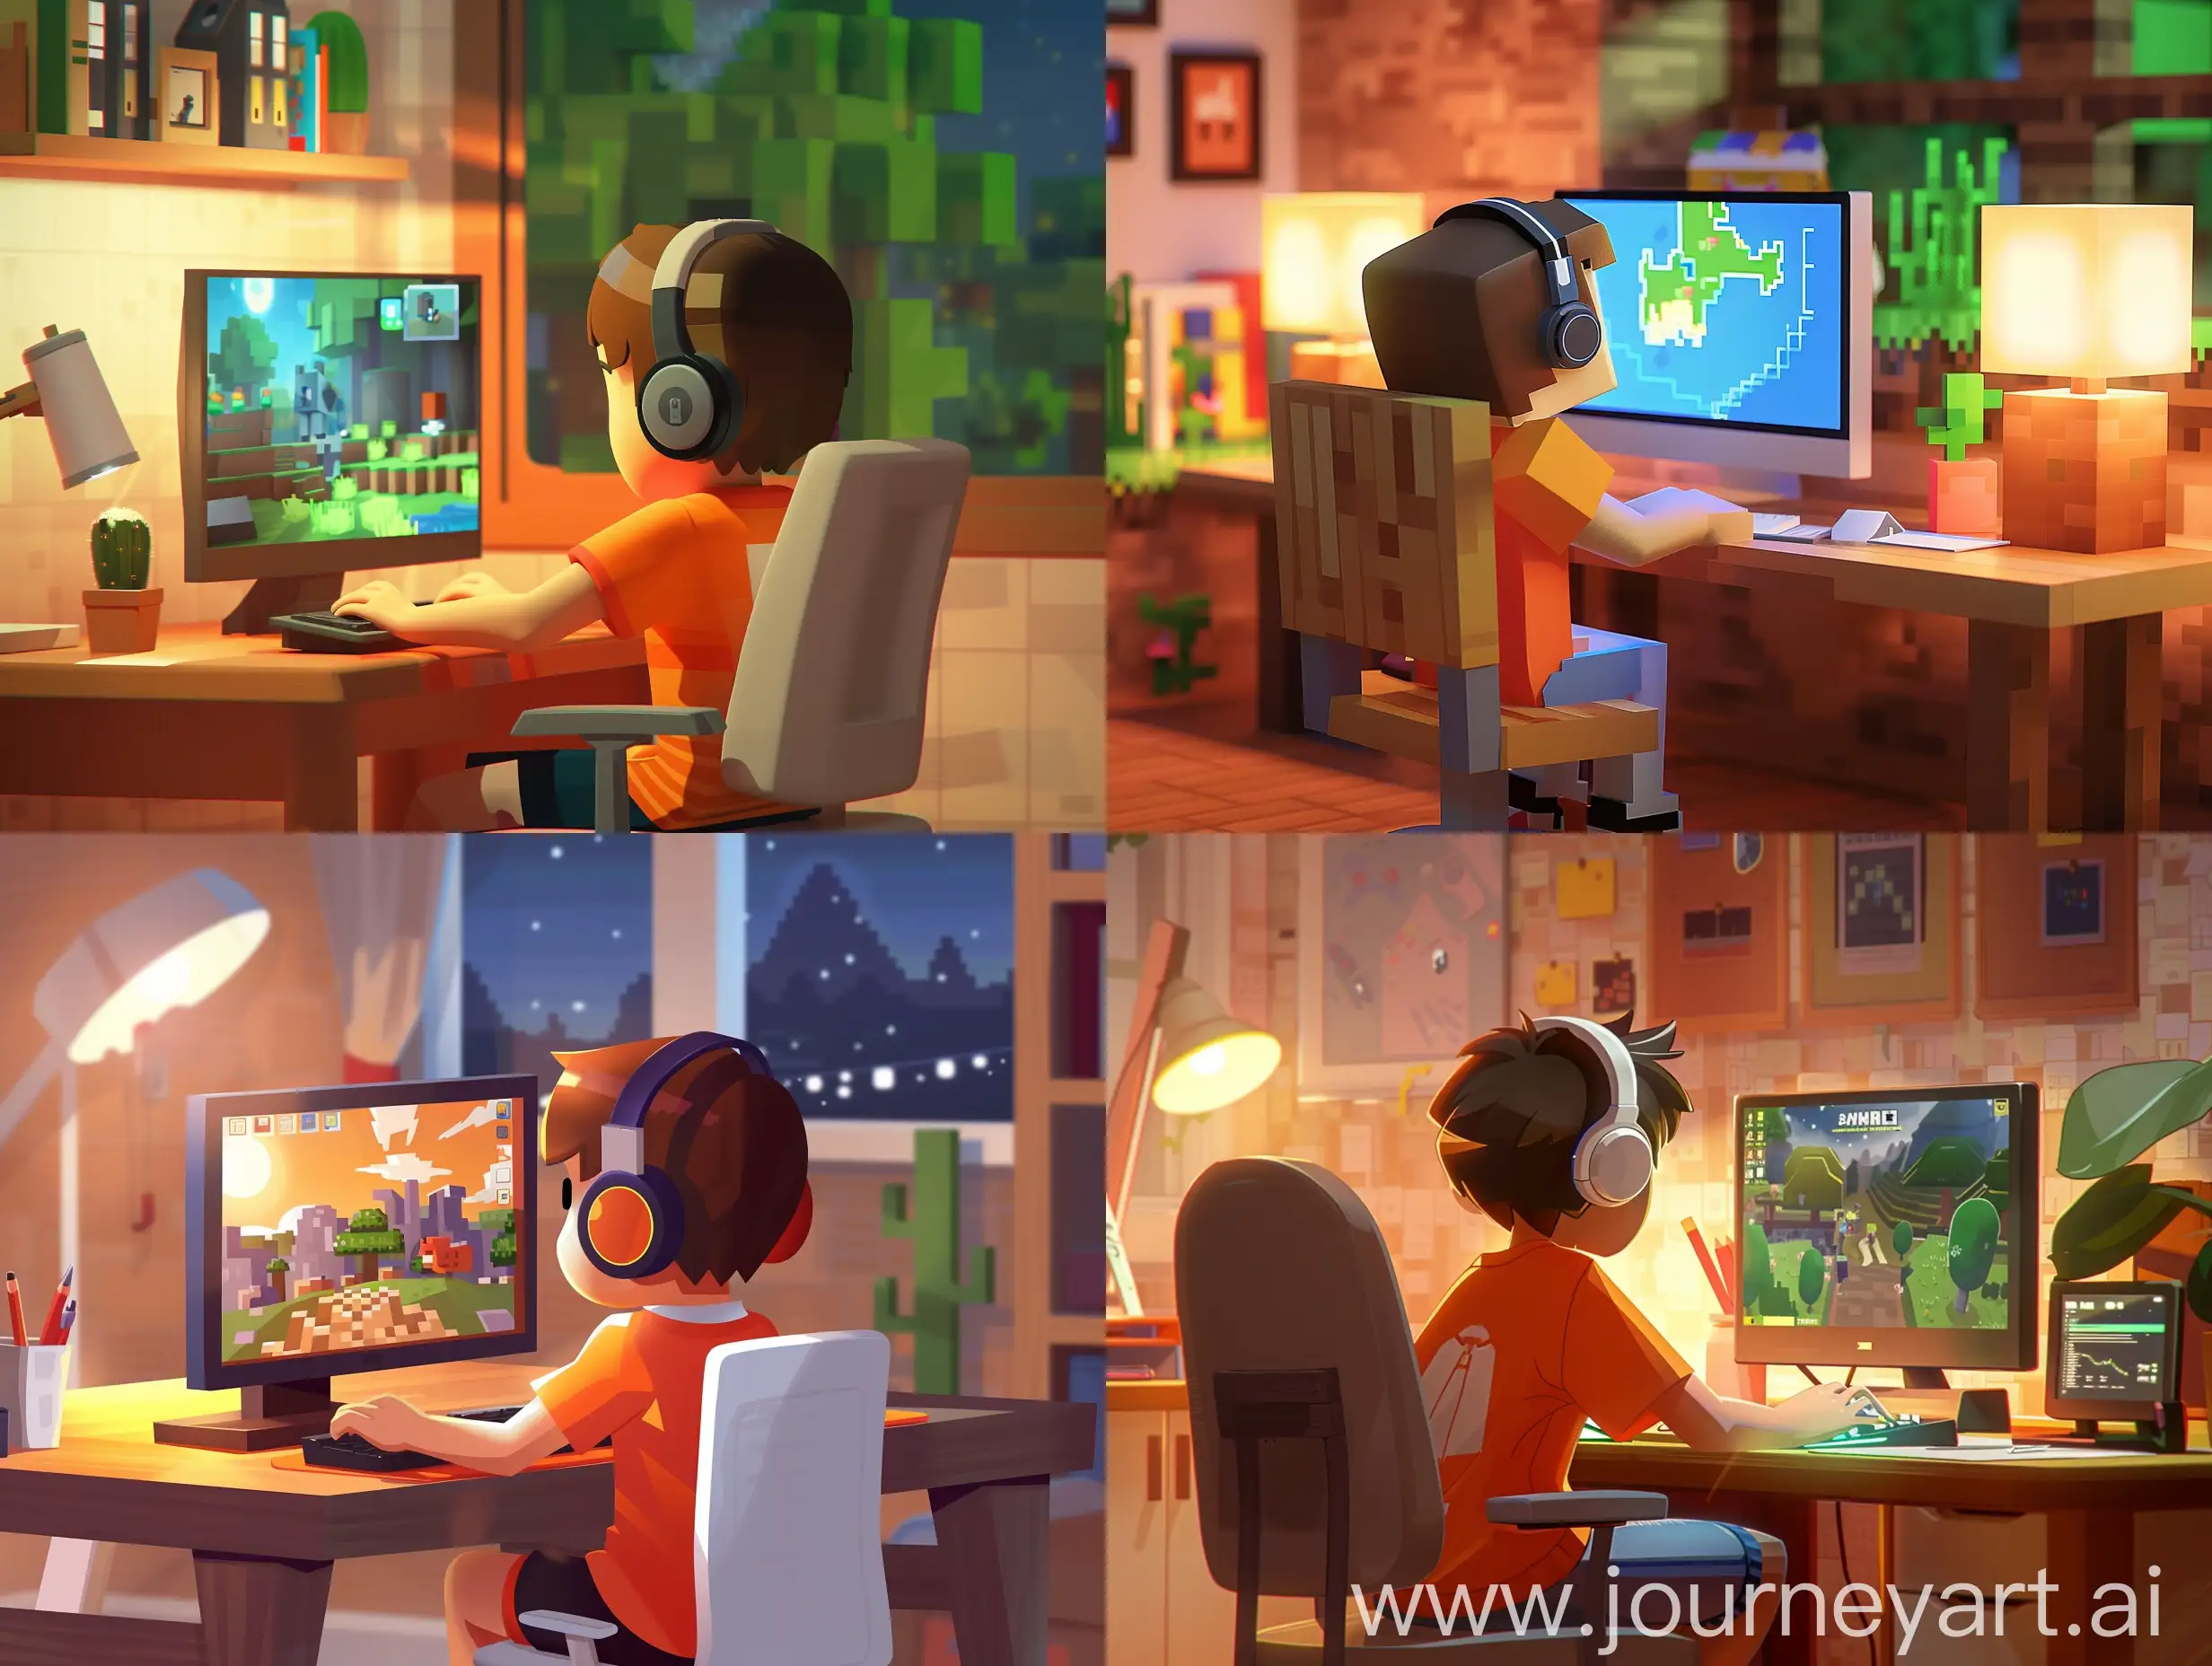 A boy is sitting at his desk, playing minecraft game on the computer in the style of Pixar. He has headphones and wears an orange shirt with white short sleeves. The room's lighting casts soft shadows across its surfaces, creating a cozy atmosphere that enhances the feel of the animated world.